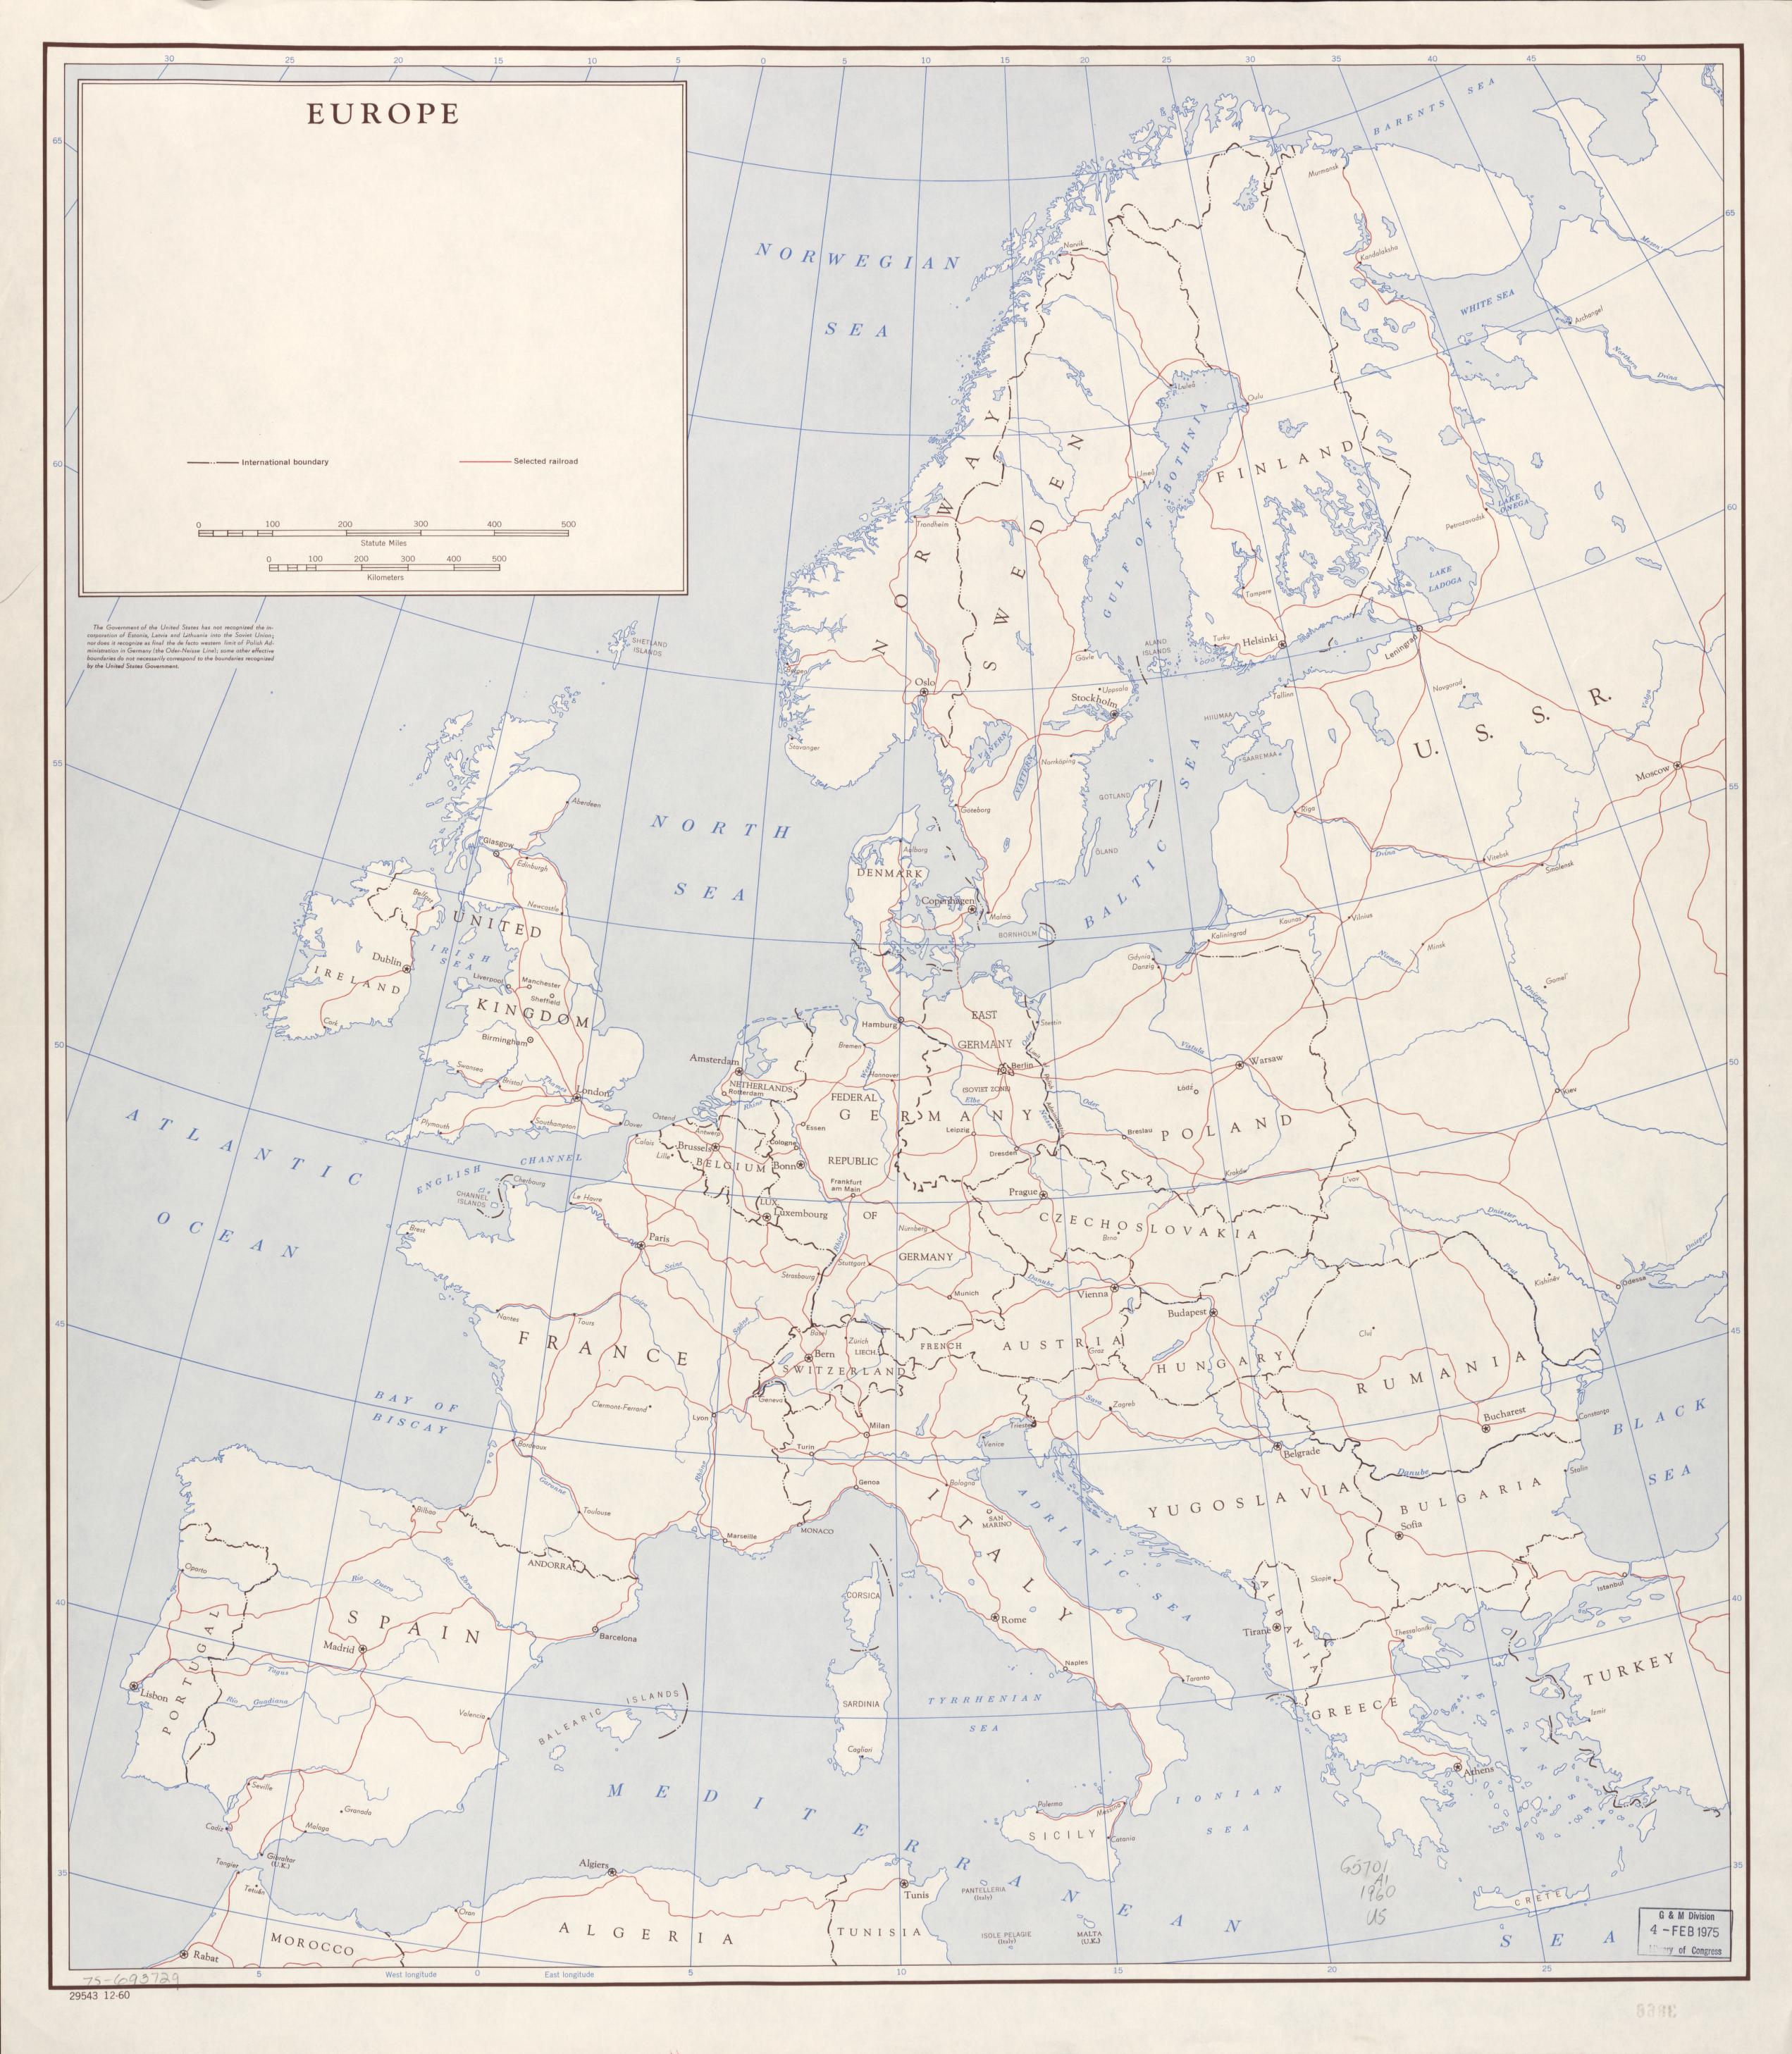 old map of europe 1960